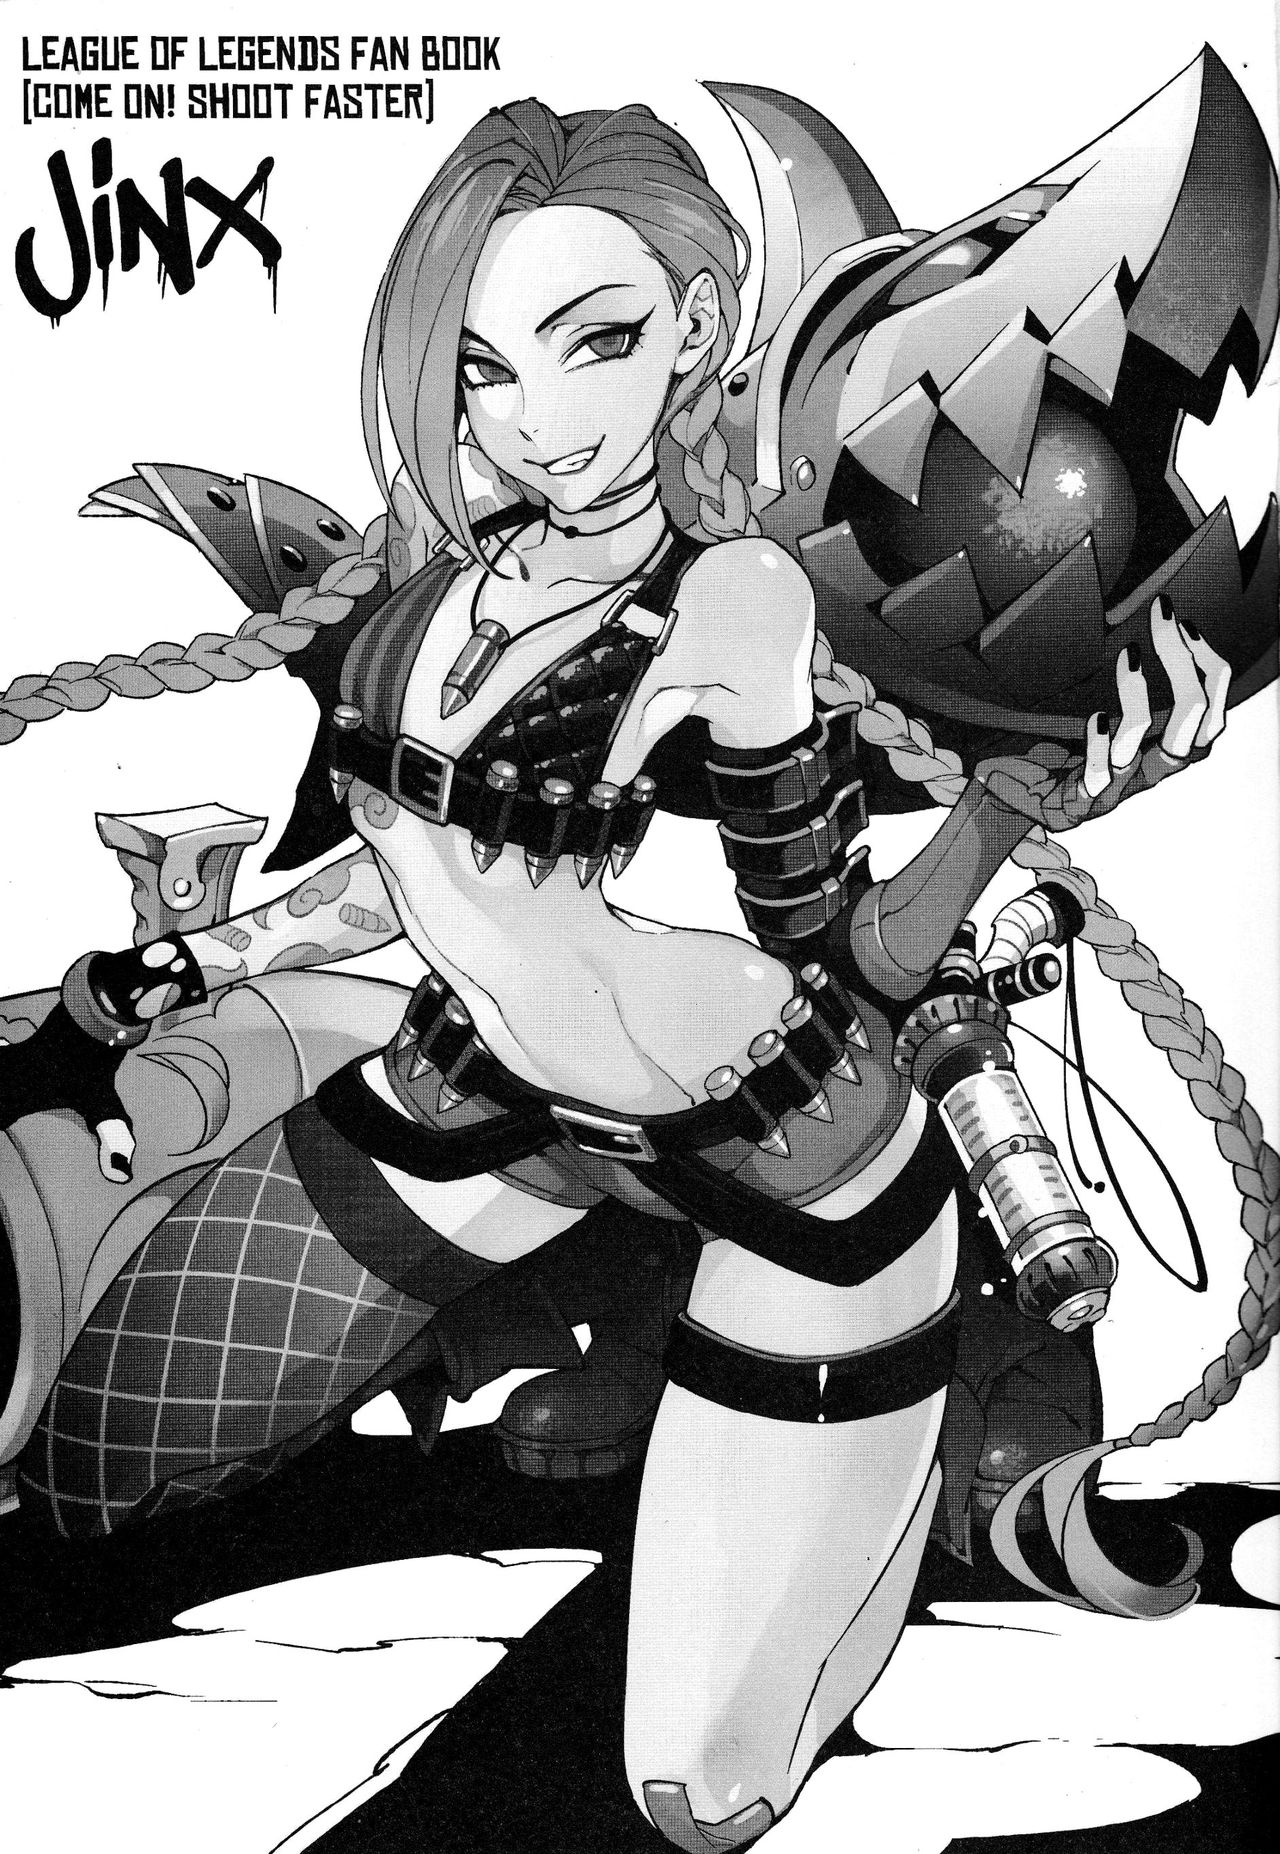 (FF23) [Turtle.Fish.Paint (Hirame Sensei)] JINX Come On! Shoot Faster (League of Legends) [Spanish] {ElMoeDela8} (FF23) [Turtle.Fish.Paint (比目魚先生)] JINX Come On! Shoot Faster (リーグ・オブ・レジェンズ) [スペイン翻訳]